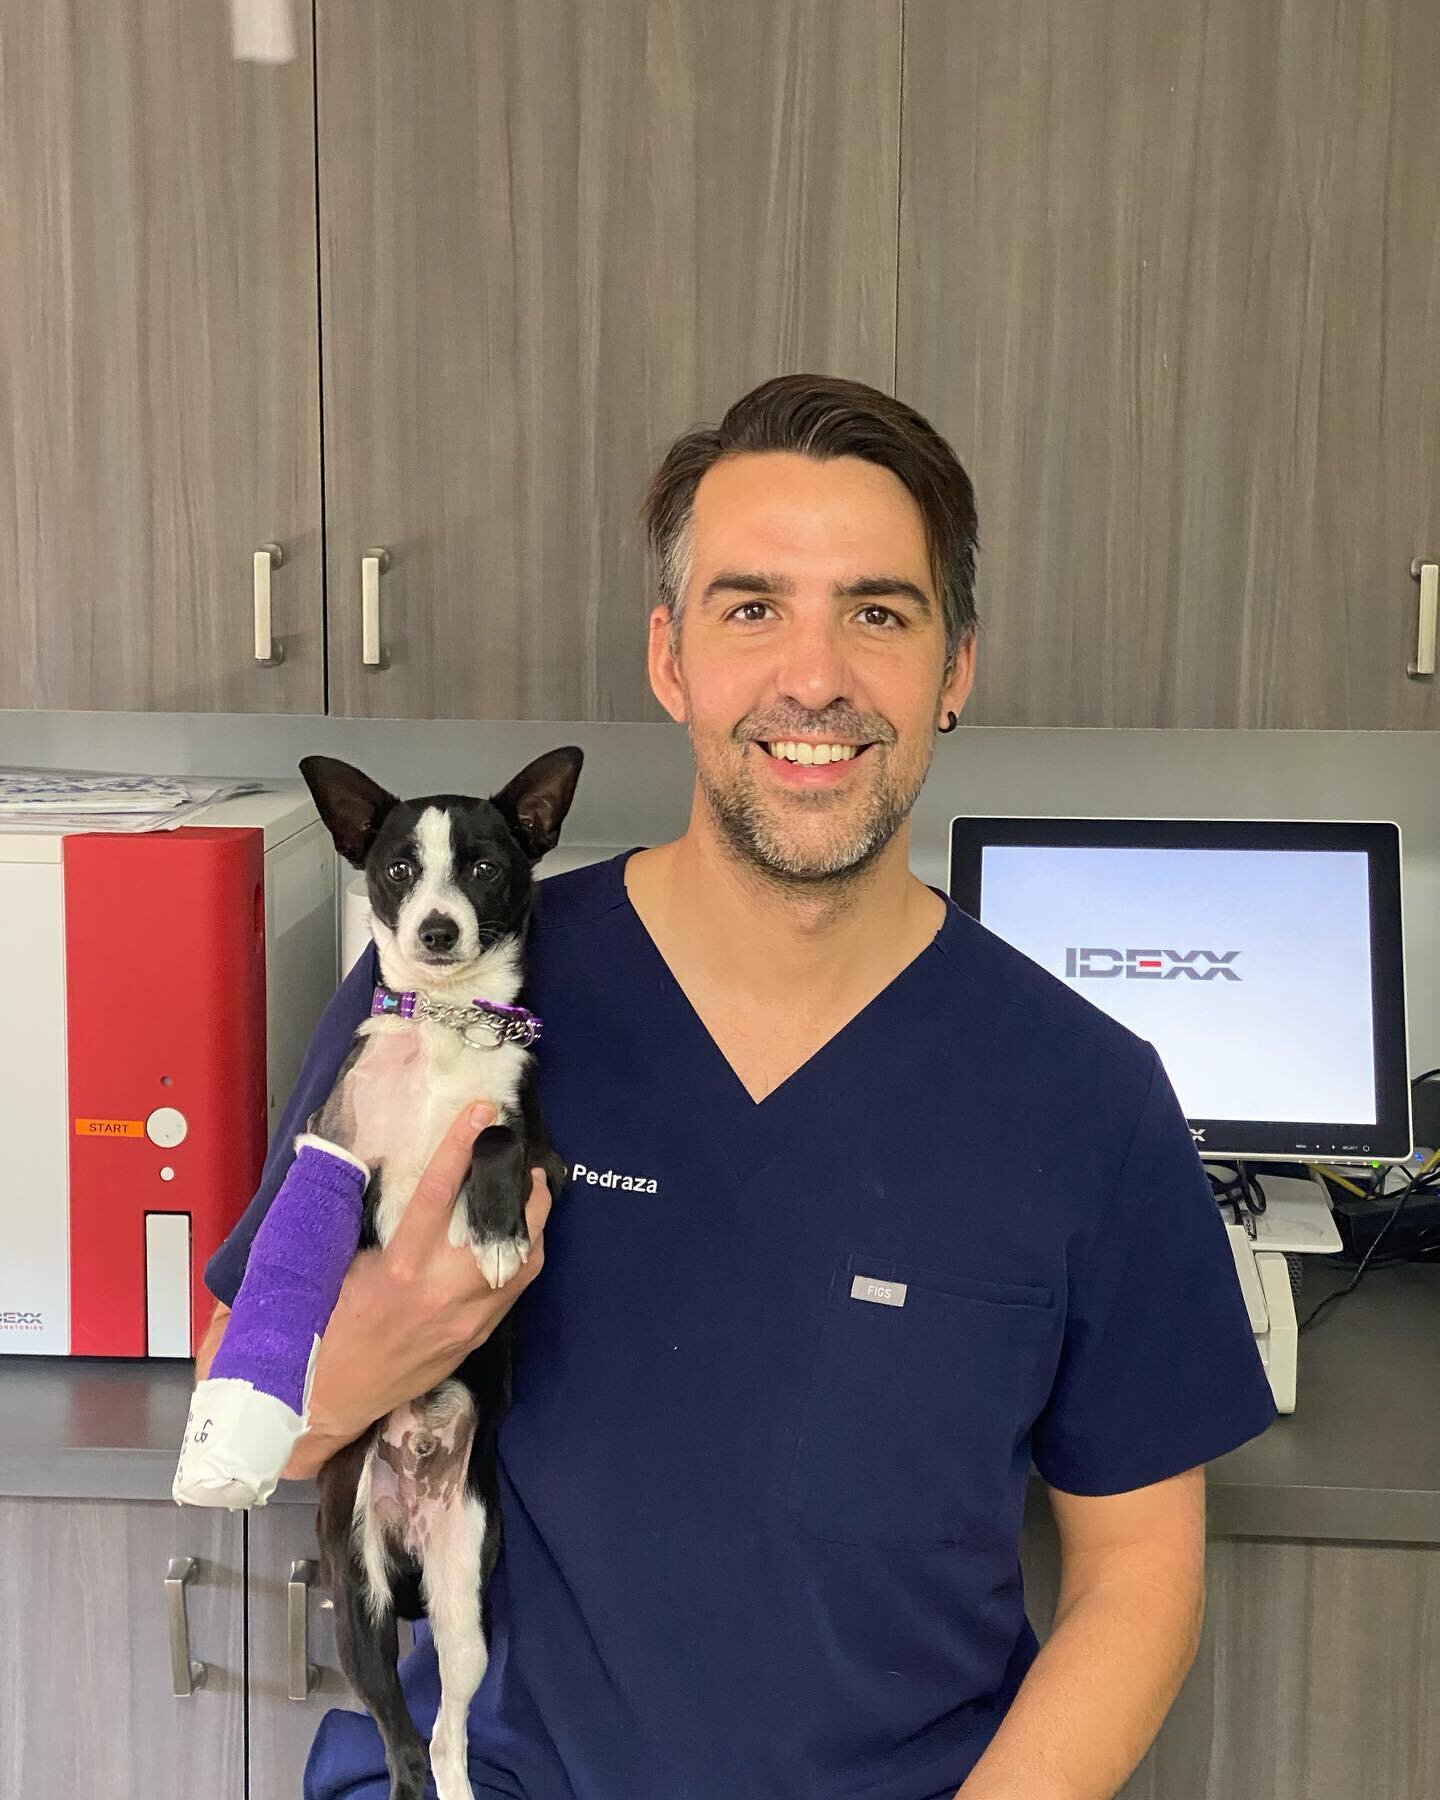 With my patient Sylvester a few days ago. Thank you to @tobiessmalldogrescue and @hopeforpawsrescue for bringing me this case. We are happy that this sweet pup will be able to get adopted to fantastic home very soon. The fracture repair was excellent